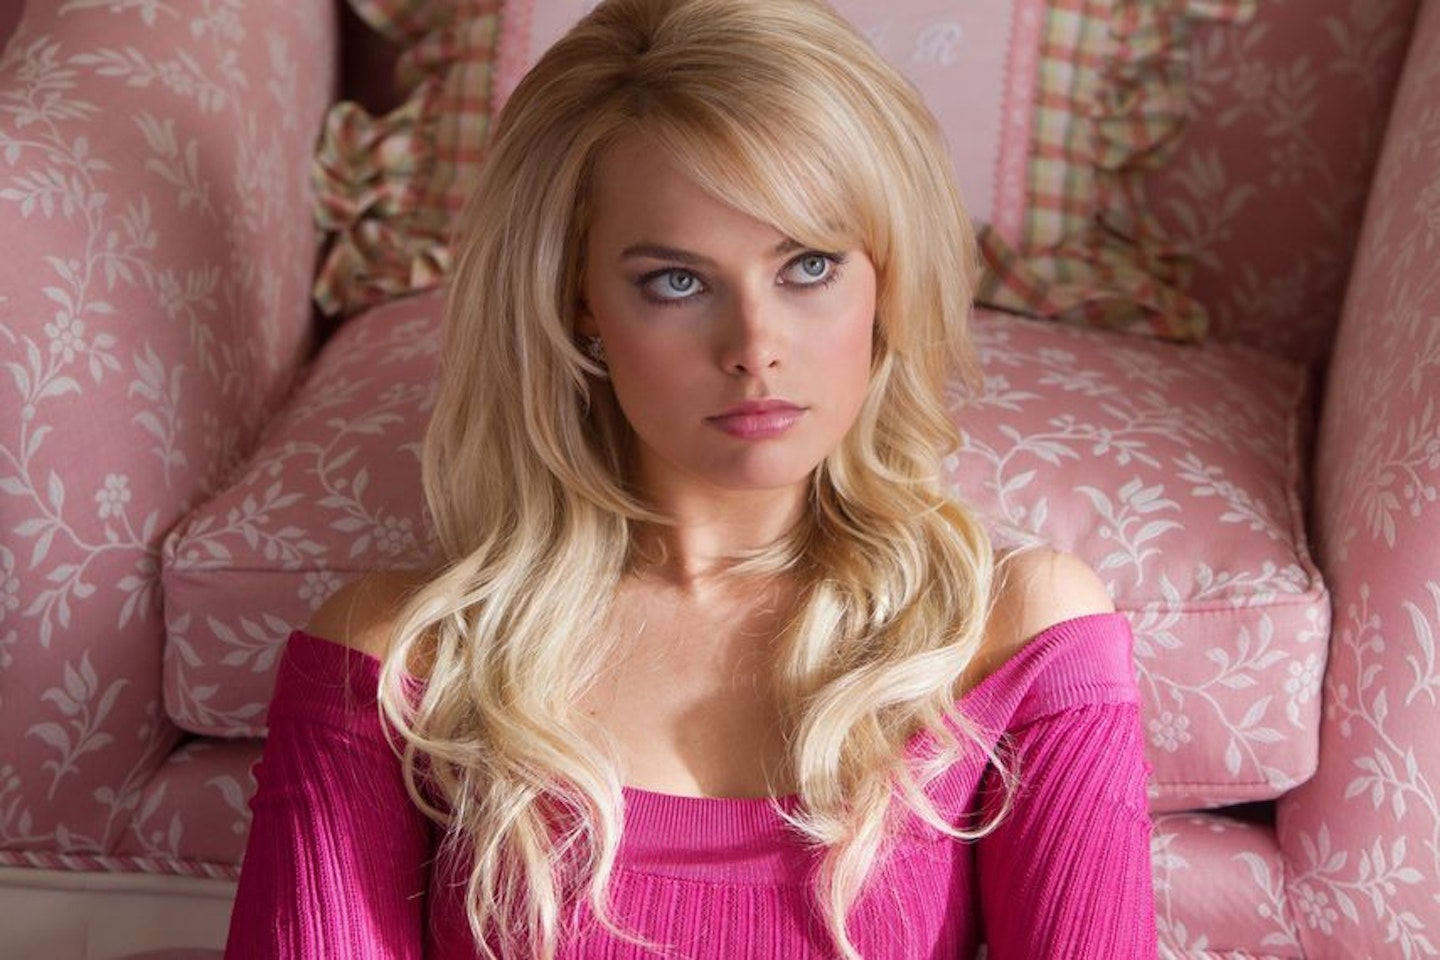 Margot Robbie as Naomi Lapaglia in The Wolf Of Wall Street